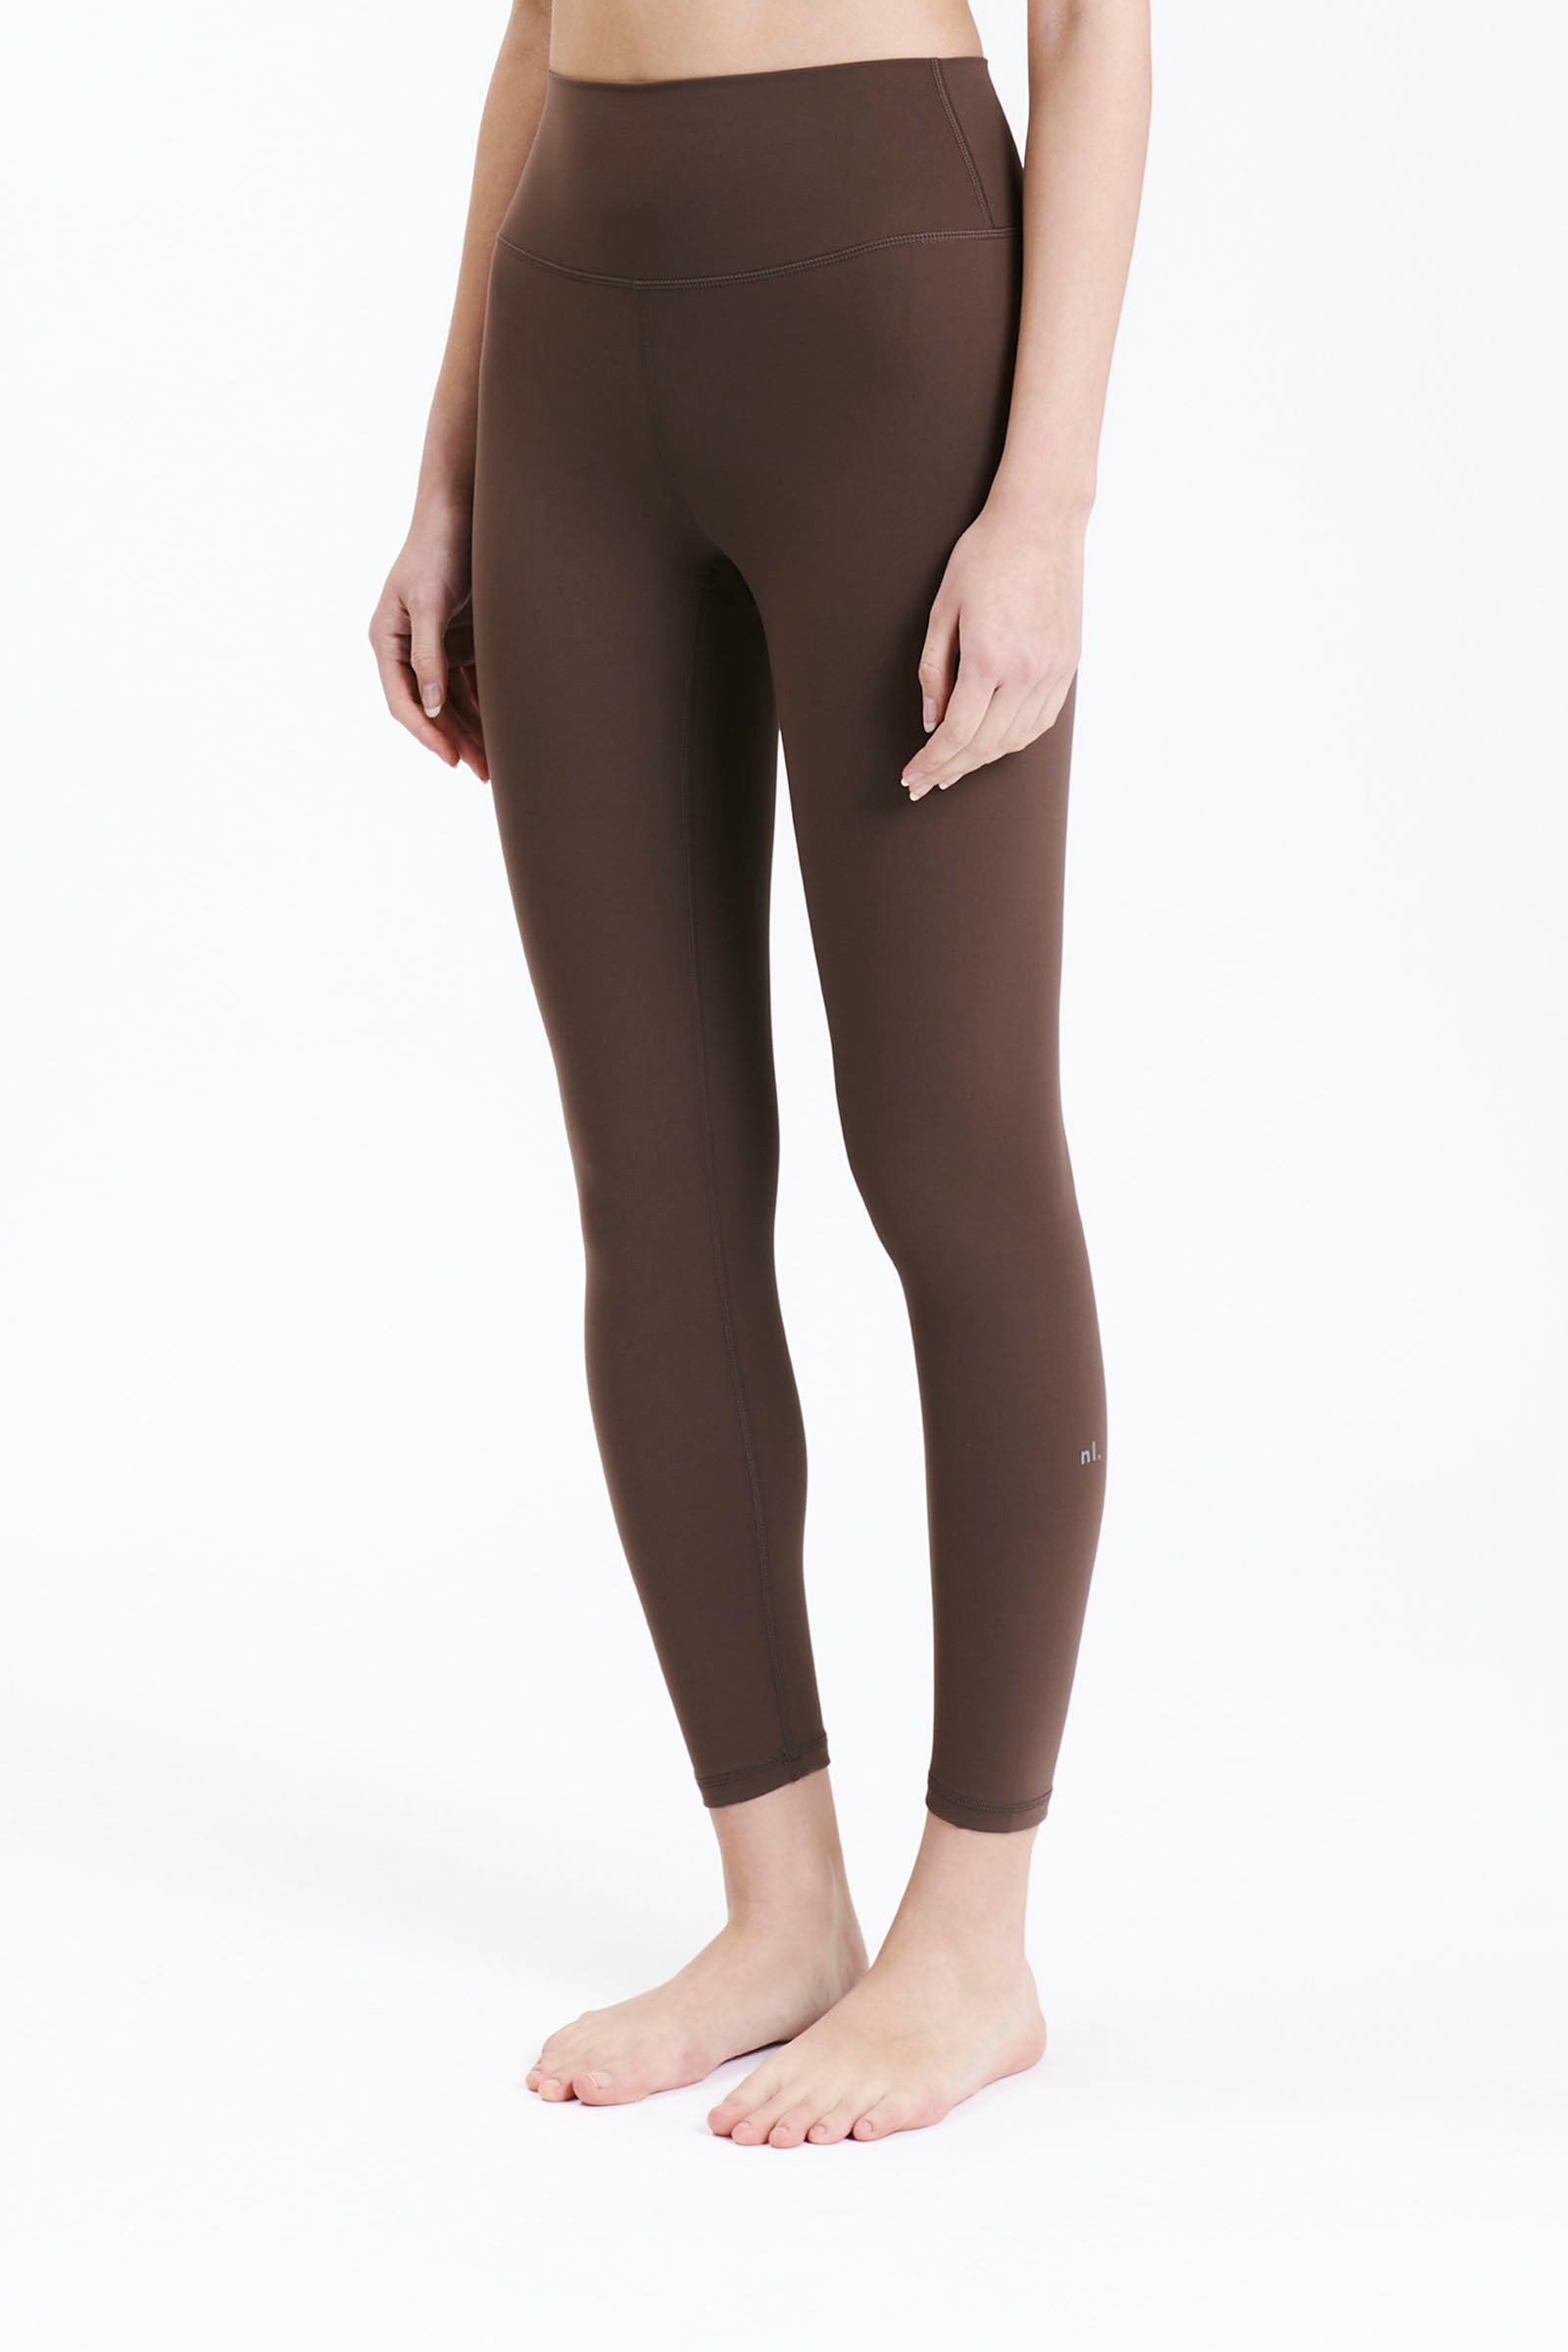 Nude Lucy Nude Active Tights in a Brown Chocolate Cacao Colour